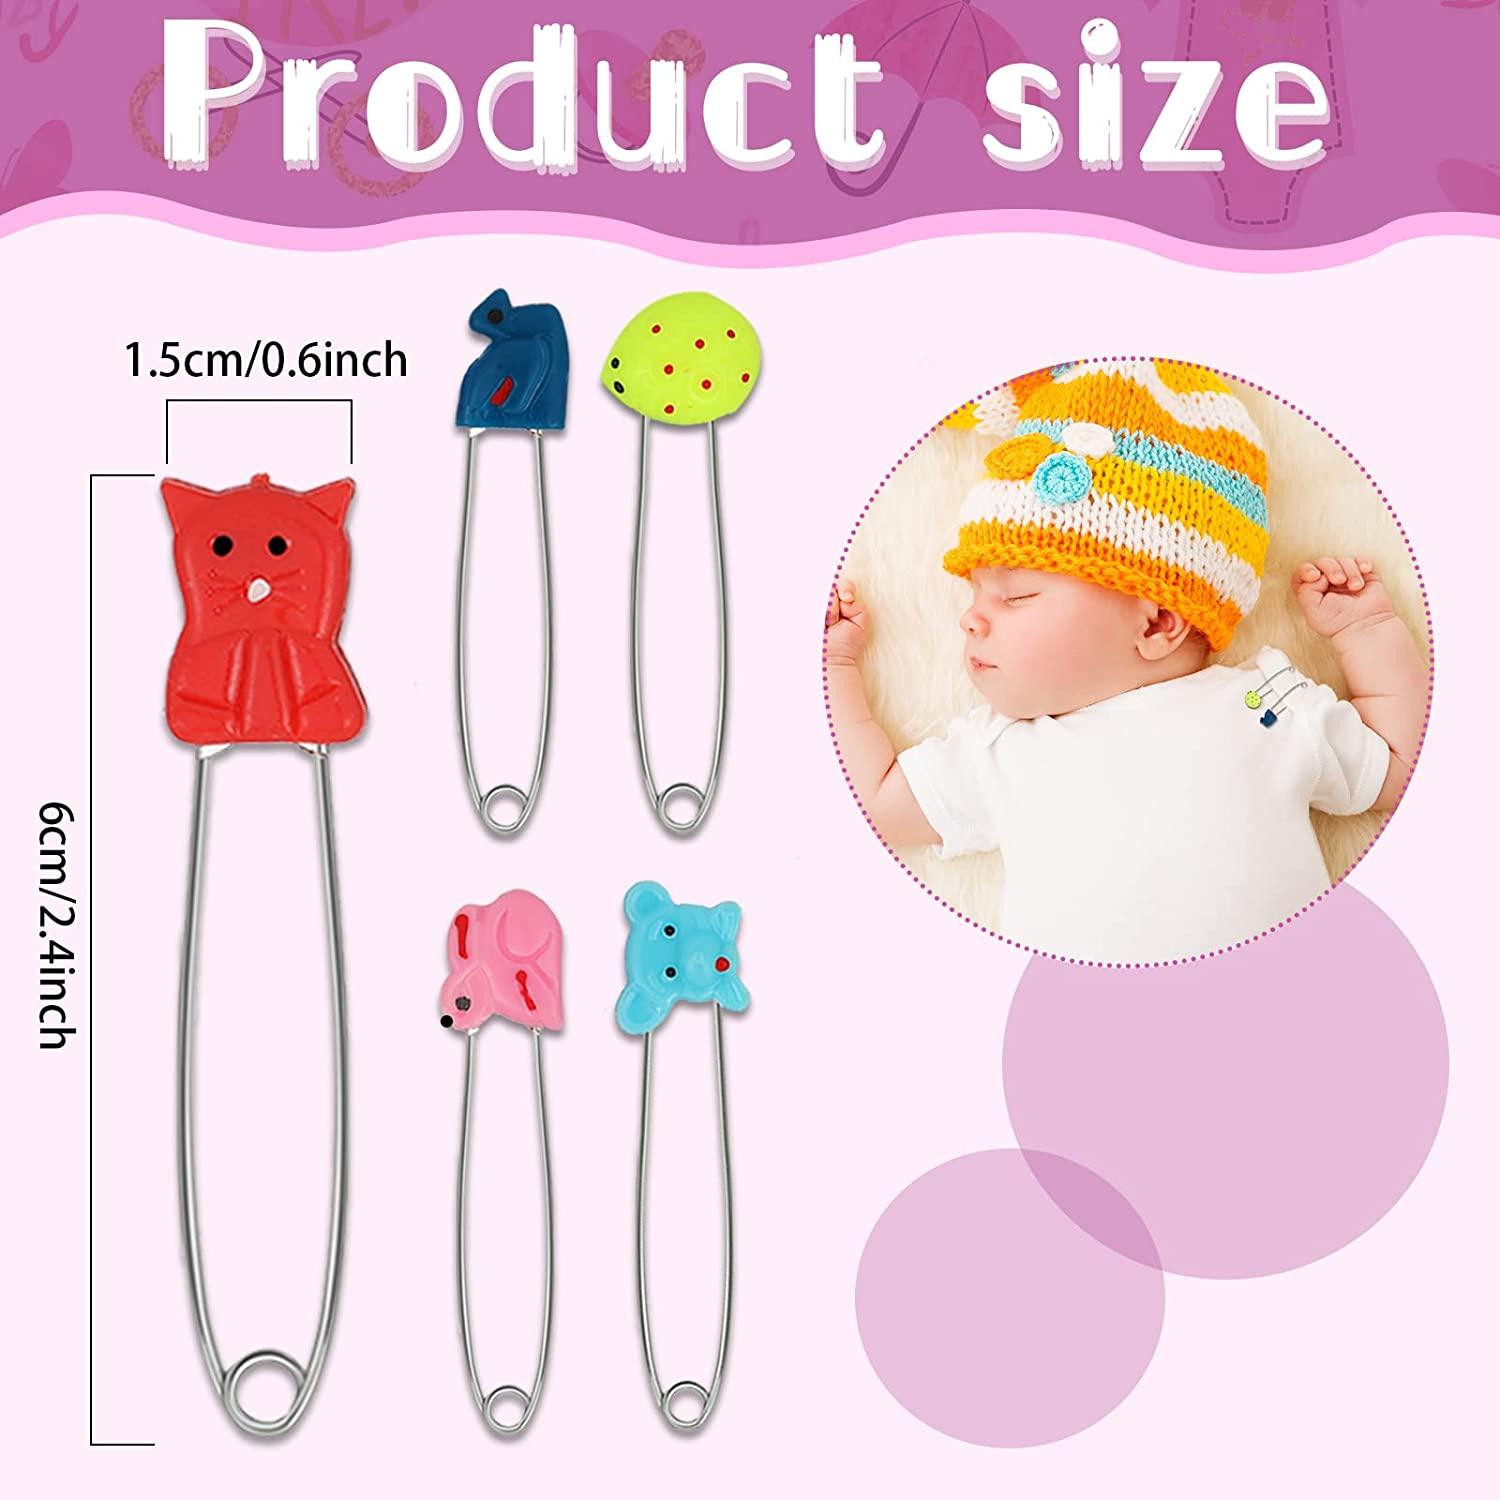 30 Pieces Diaper Pin Baby Safety Pin 2.4 Inch Stainless Steel Diaper Pins  with Plastic Head Animal Pattern Kids Newborn Safety Pin with Lock Buckle,  Random Patterns